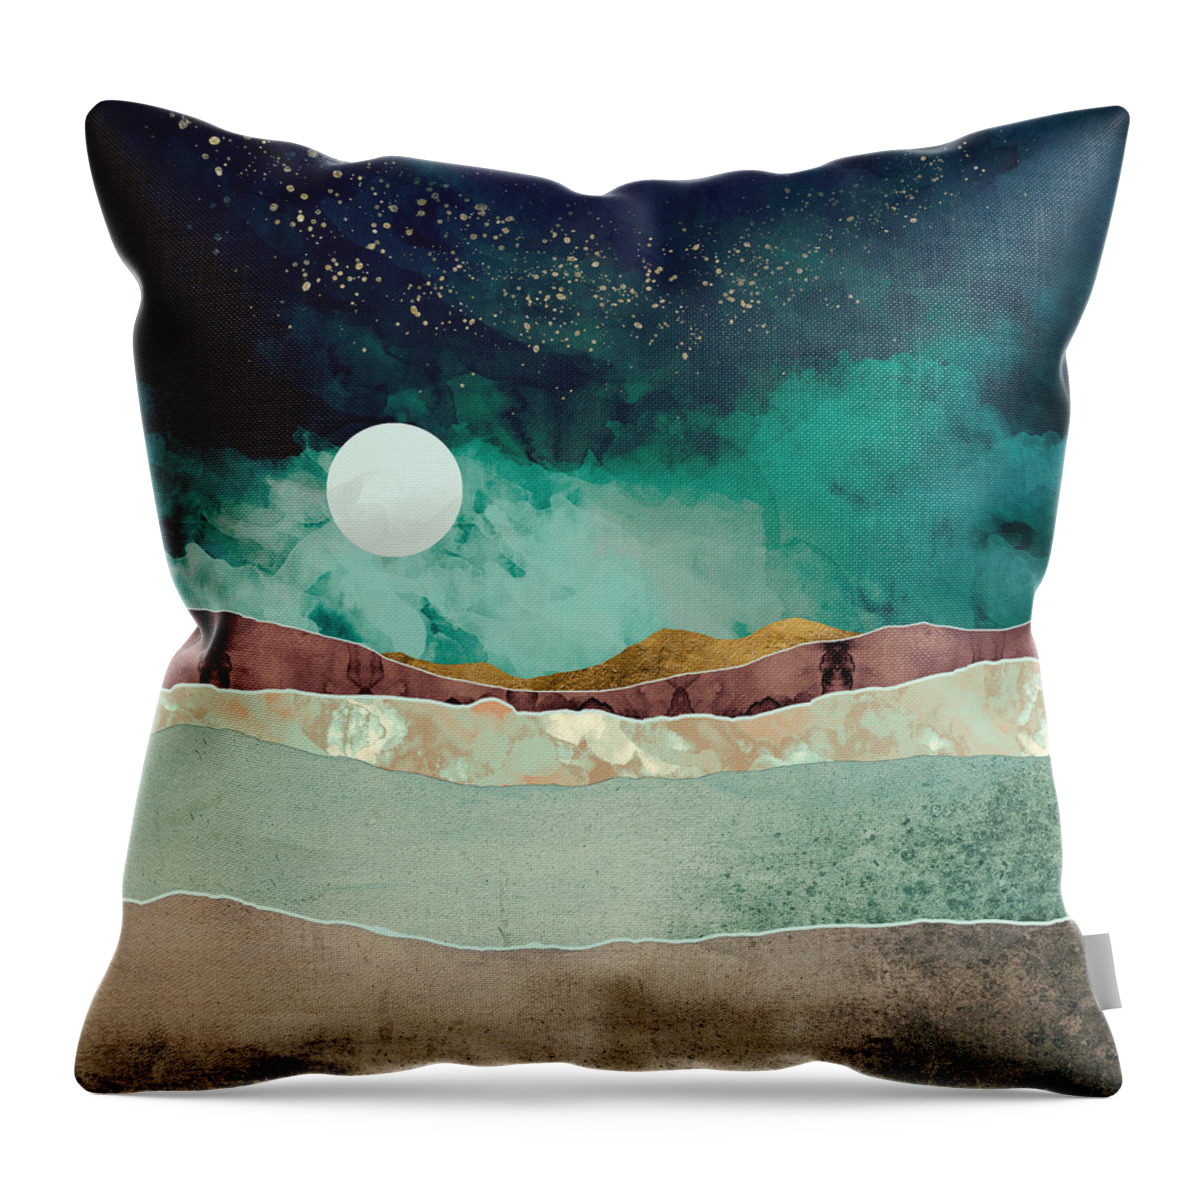 Spring Throw Pillow featuring the digital art Spring Night by Katherine Smit